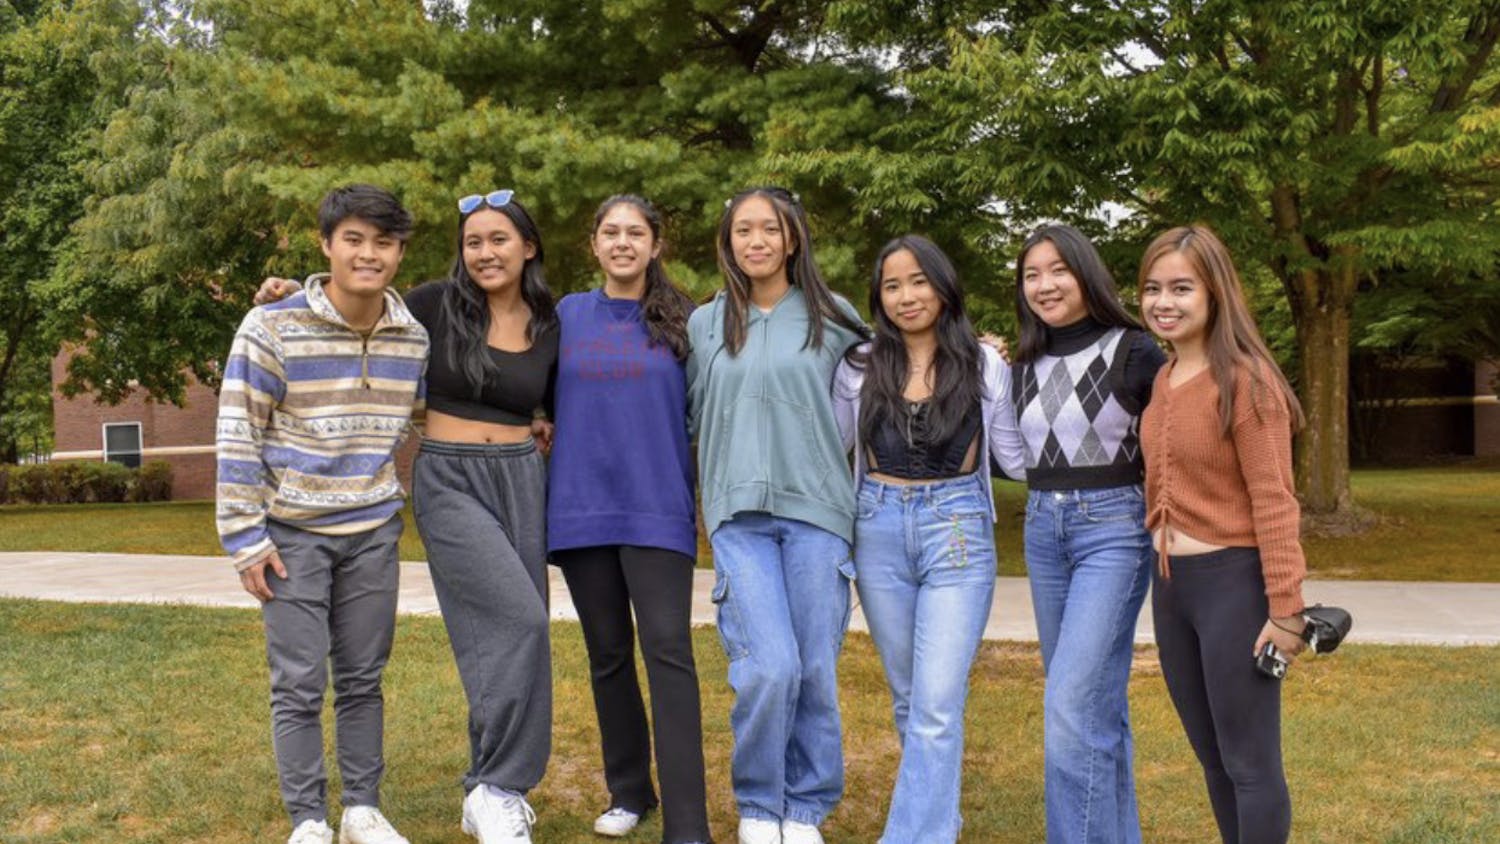 The Vietnamese Student Association seeks to emphasize the Vietnamese student experience and bring attention to the country's culture, values and traditions. (Photo by Uzi Cortez)